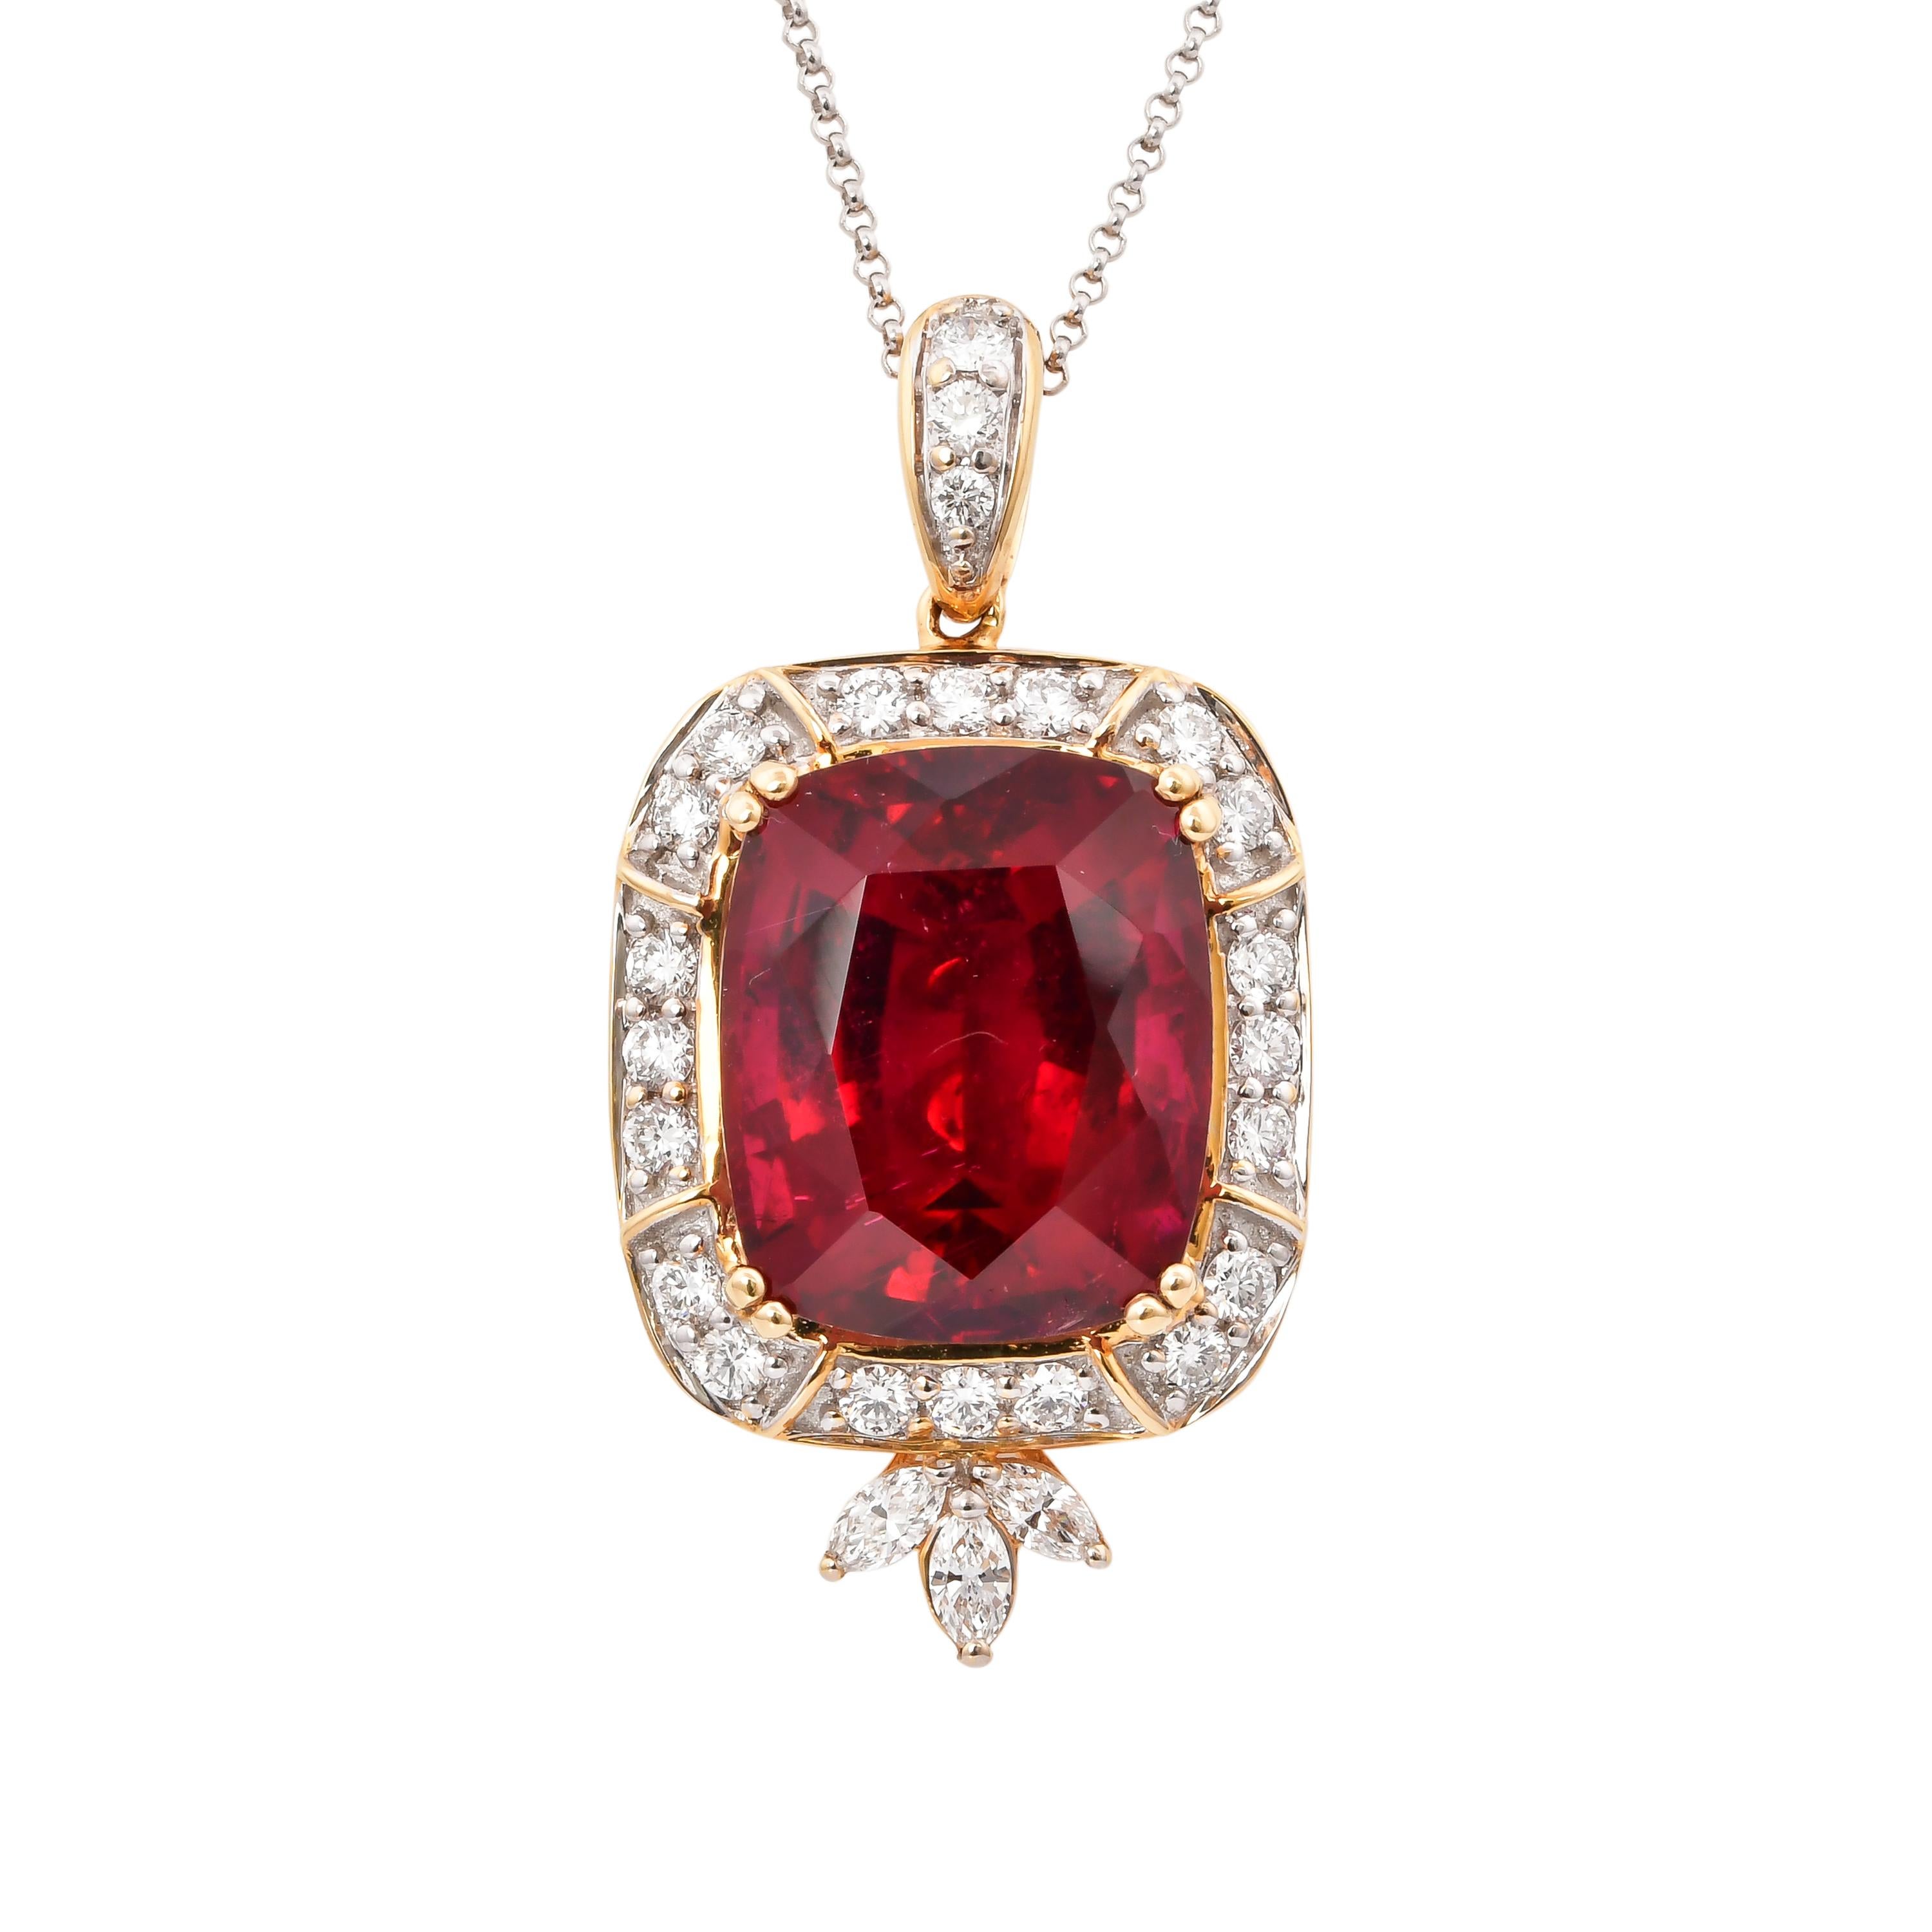 This collection features the most radiant Rubellite tourmalines. These gemstones show a magnificent and regal deep red Colour, and the yellow gold and diamond accents makes these pieces a true showstopper. 

Classic Rubellite tourmaline pendant in